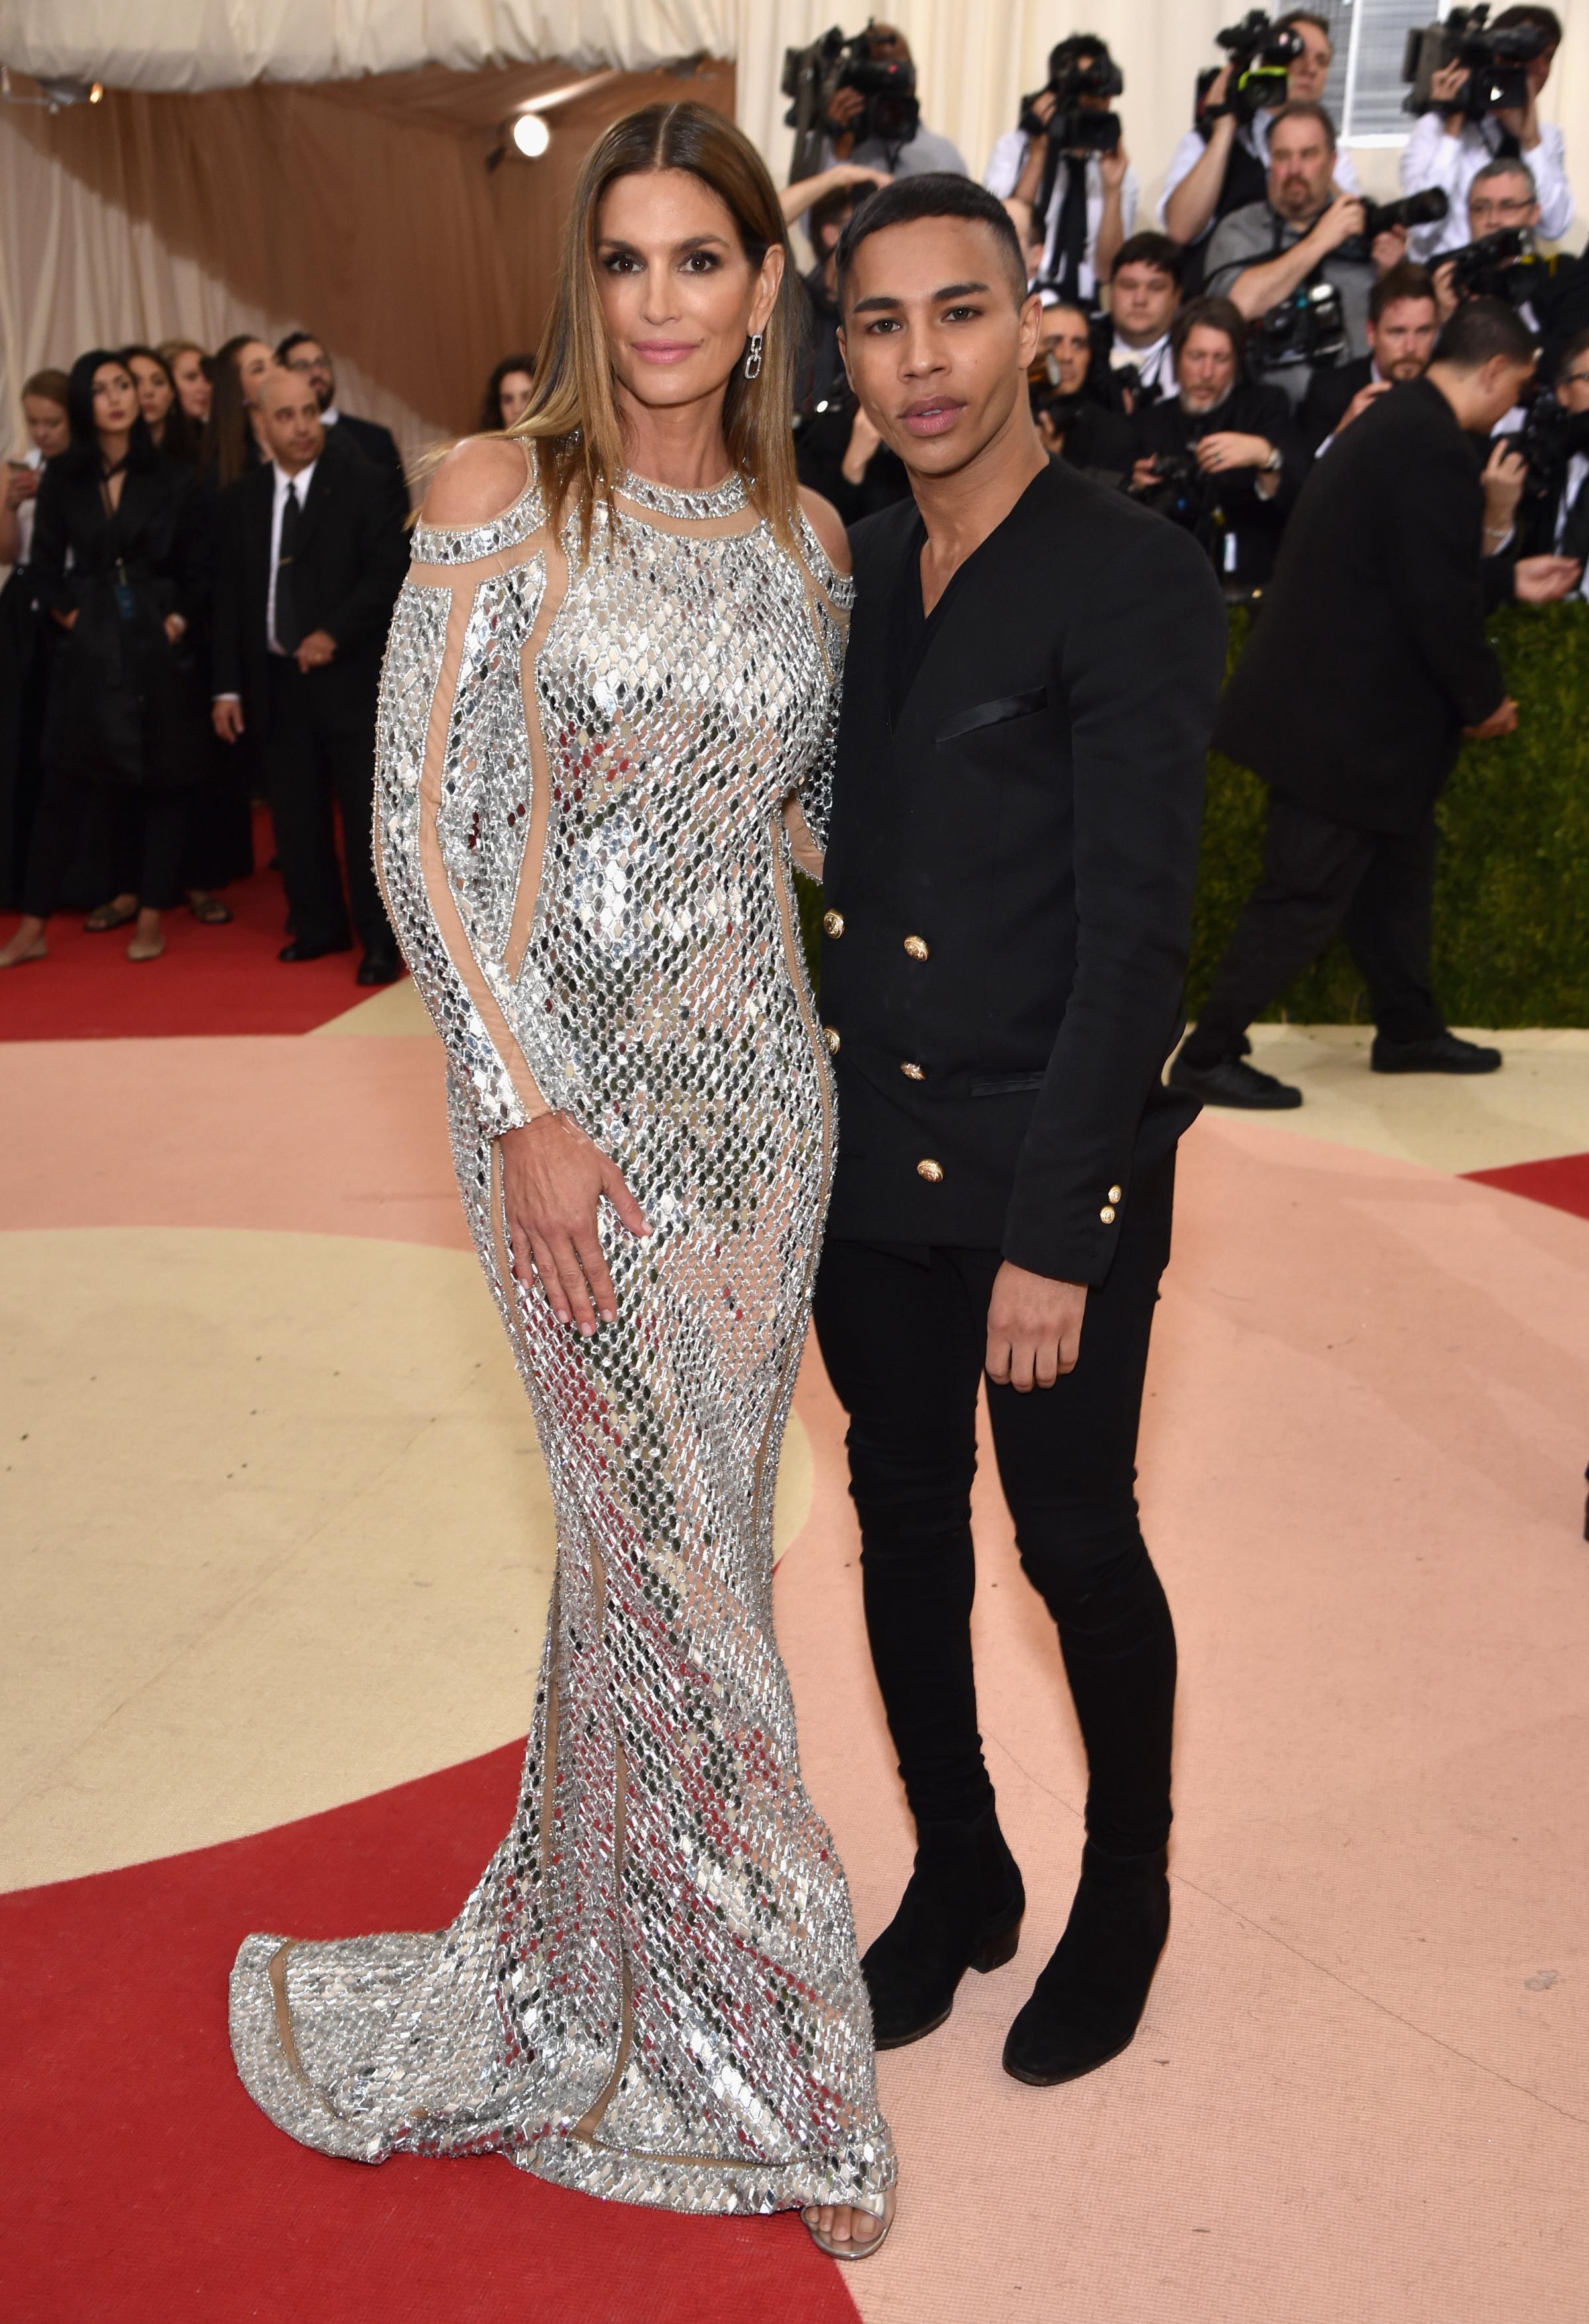 Cindy Crawford and designer Olivier Rousteing attend "Manus x Machina: Fashion In An Age Of Technology" Costume Institute Gala at Metropolitan Museum of Art on May 2, 2016 in New York City.